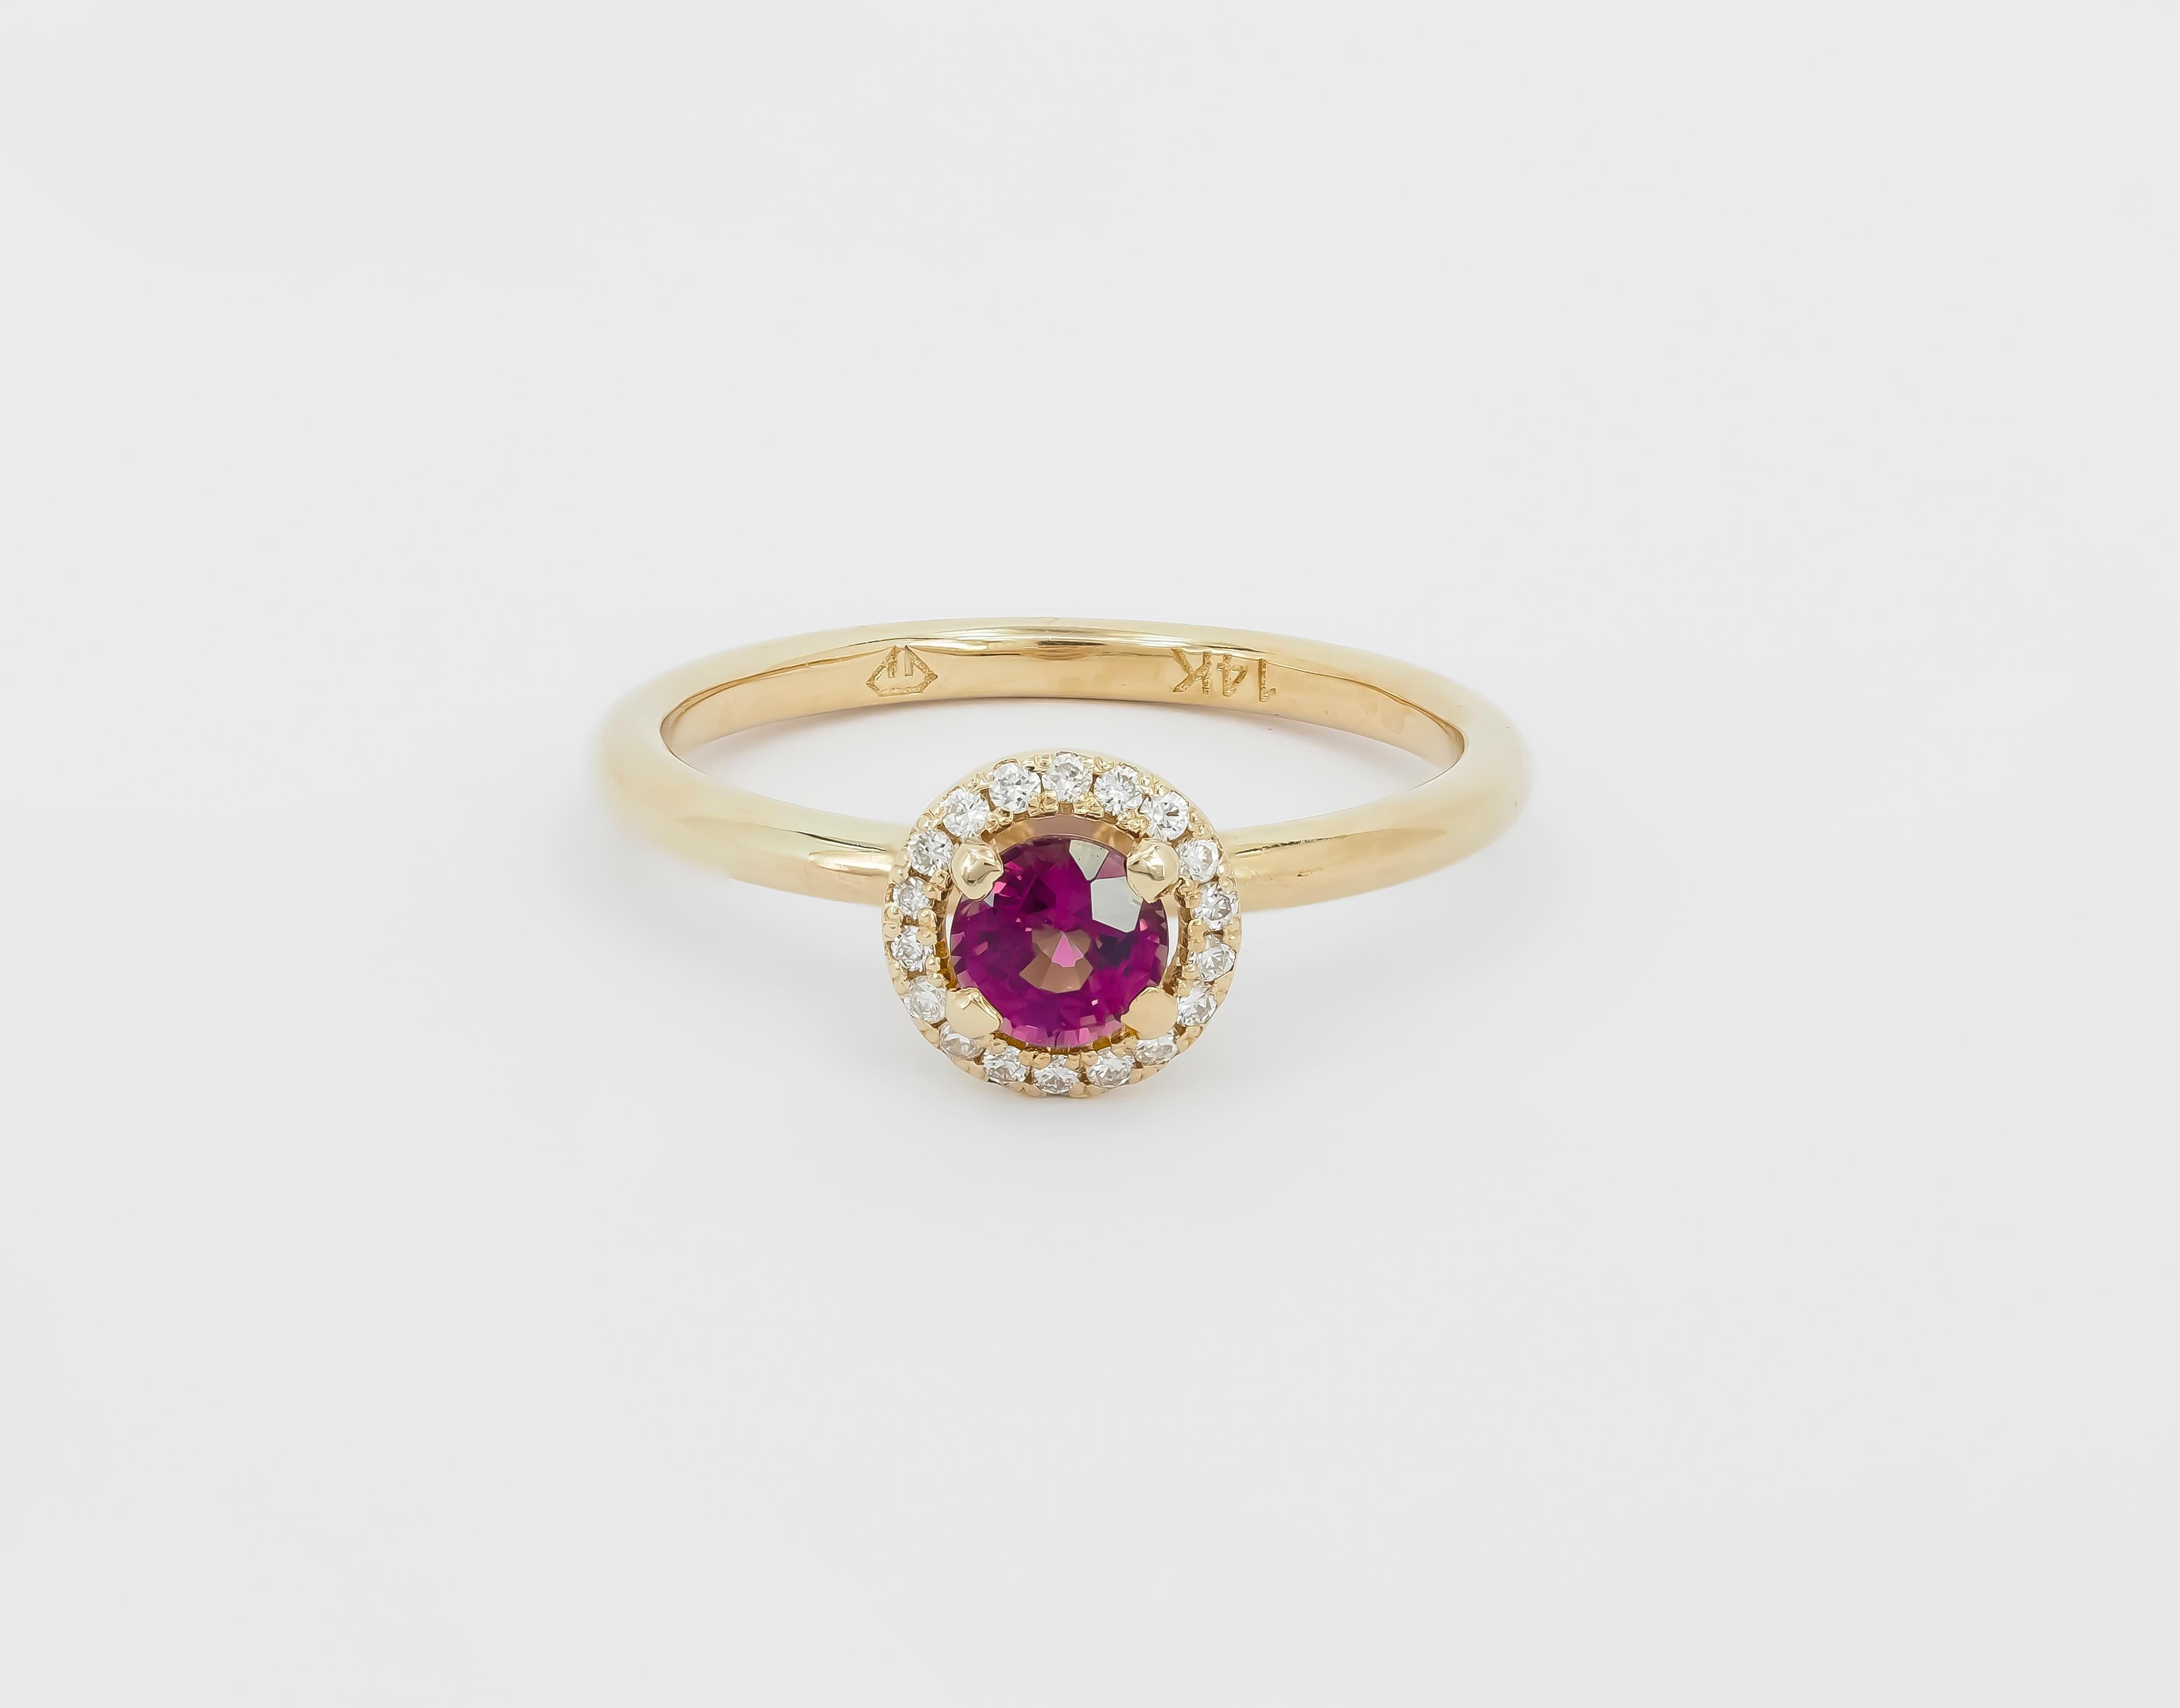 For Sale:  14k Solid Gold Ring with Natural Spinel and Diamonds 8